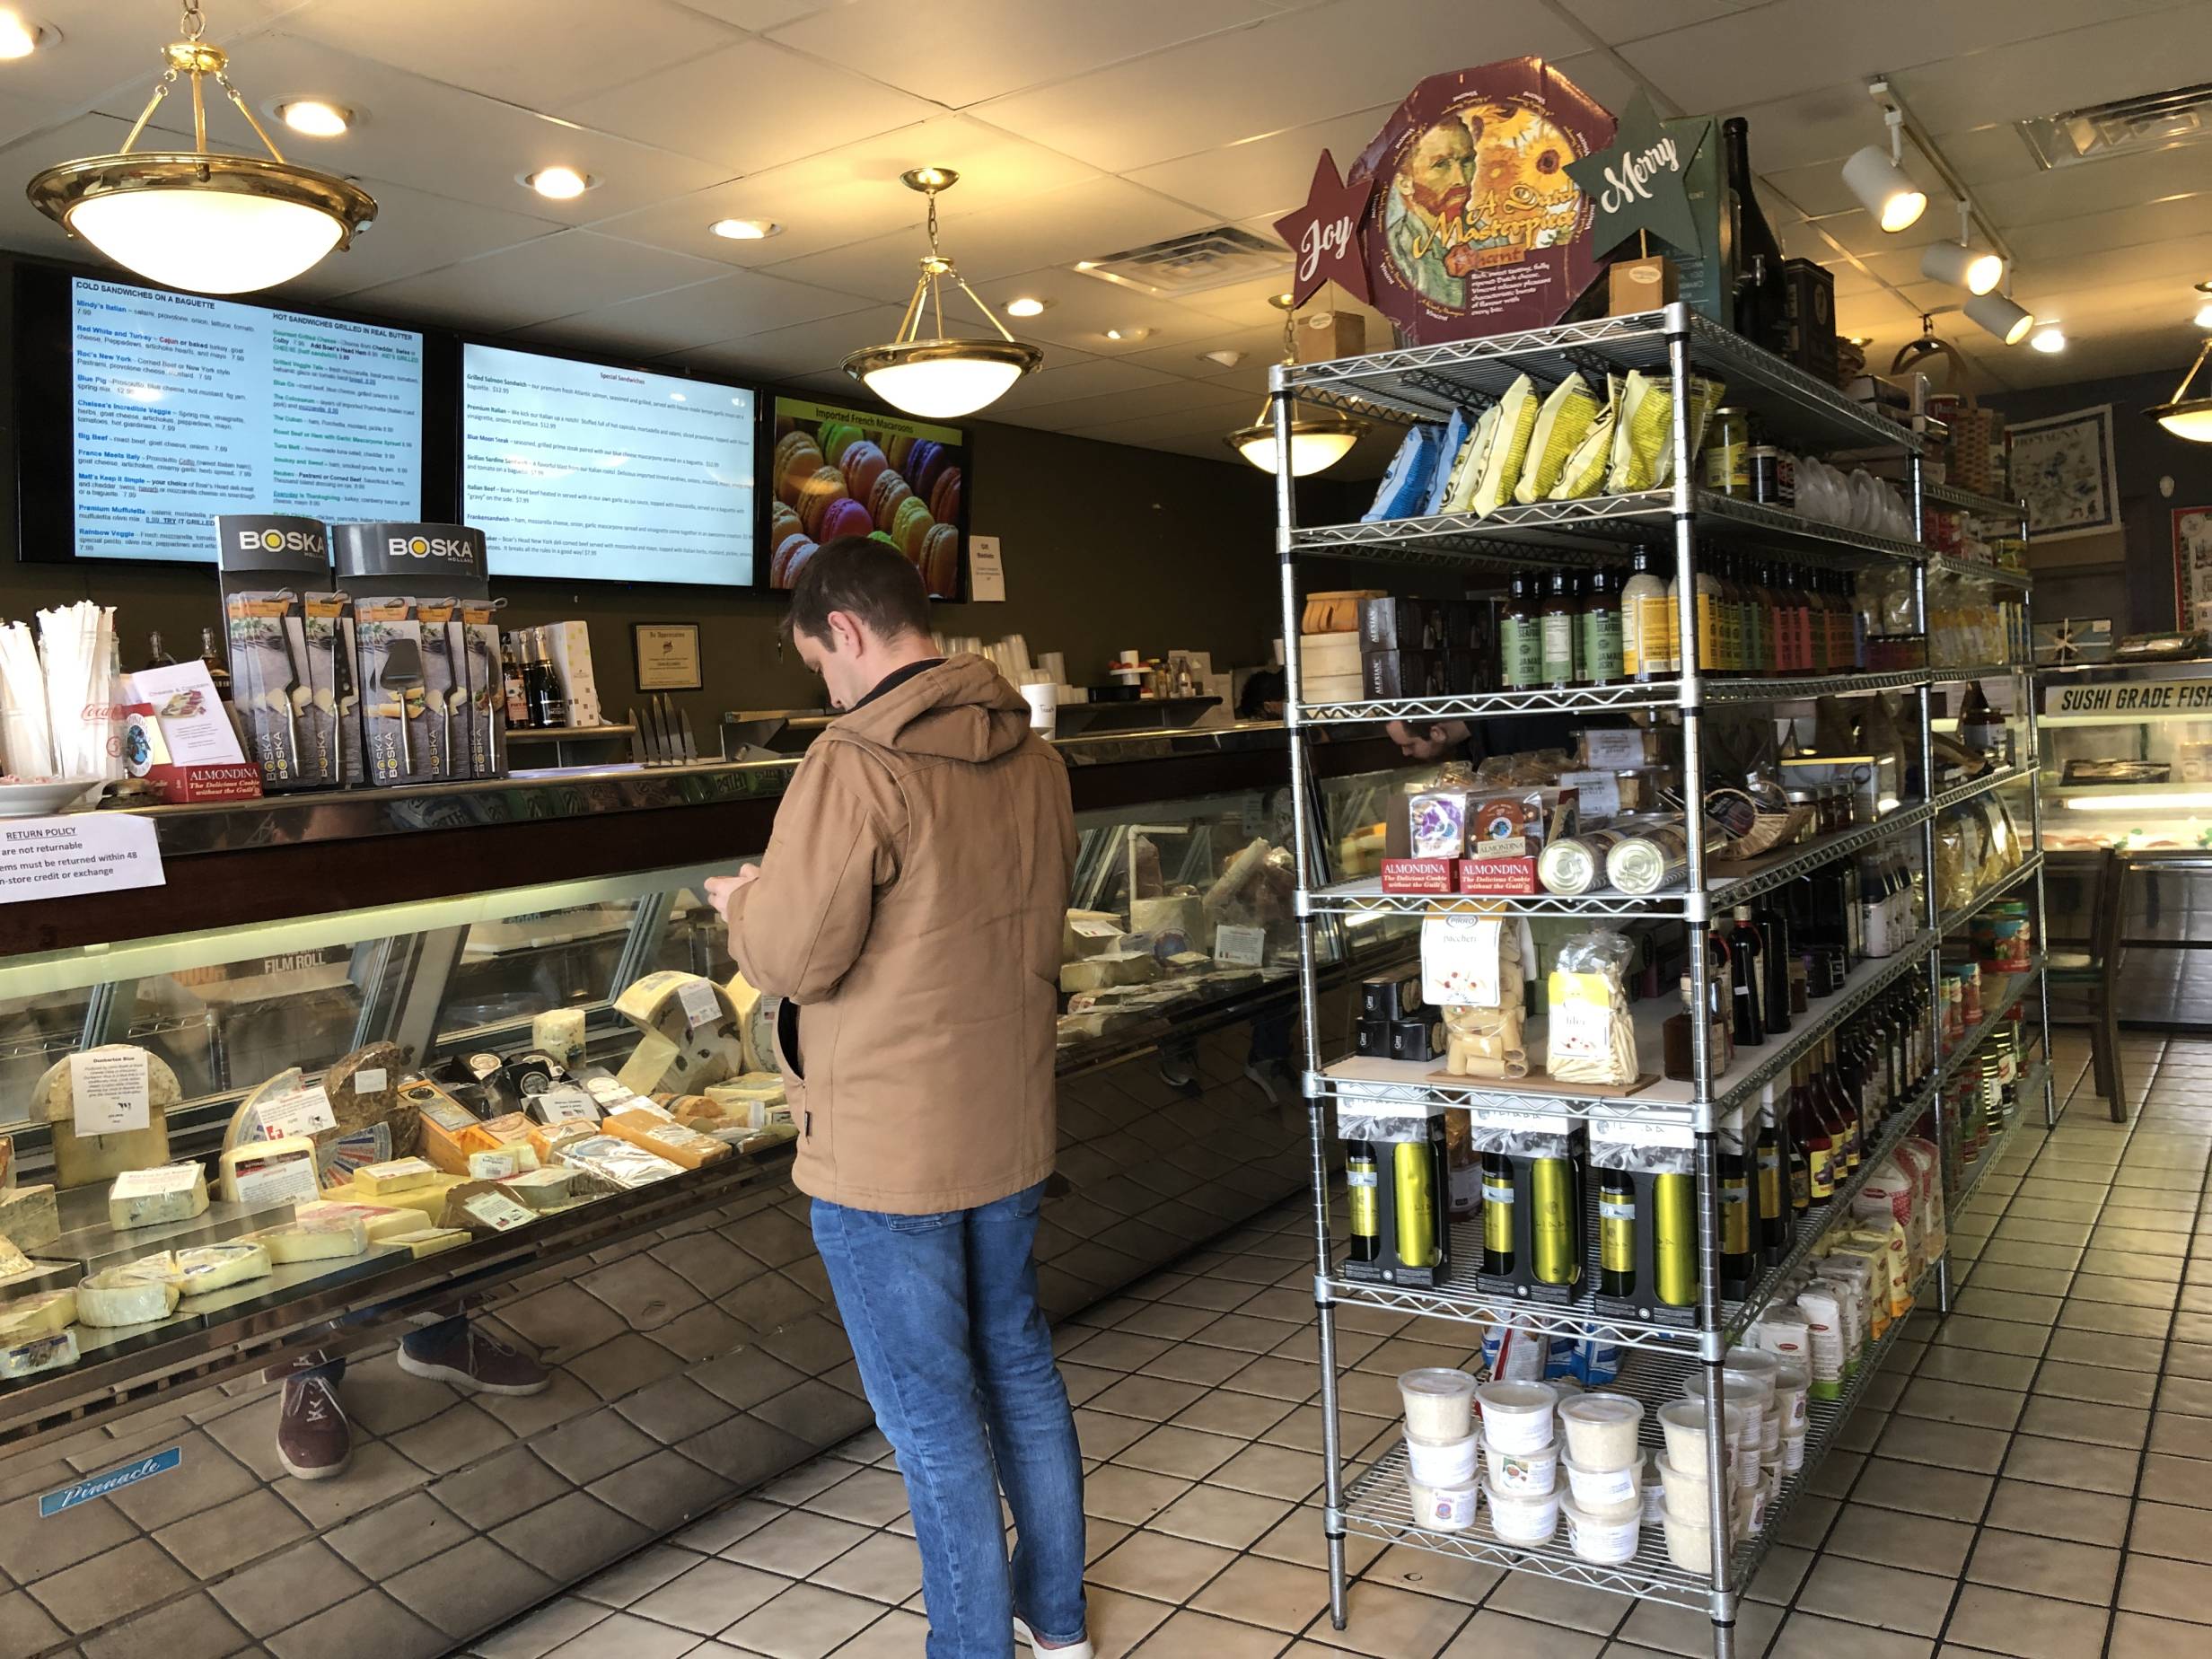 The interior of Cheese & Crackers with a patron waiting to be served. There is a long refrigerated case of various cheeses followed by another of cured meats and sausages. The middle has a many-tiered shelf of non-perishable goods. Photo by Alyssa Buckley.